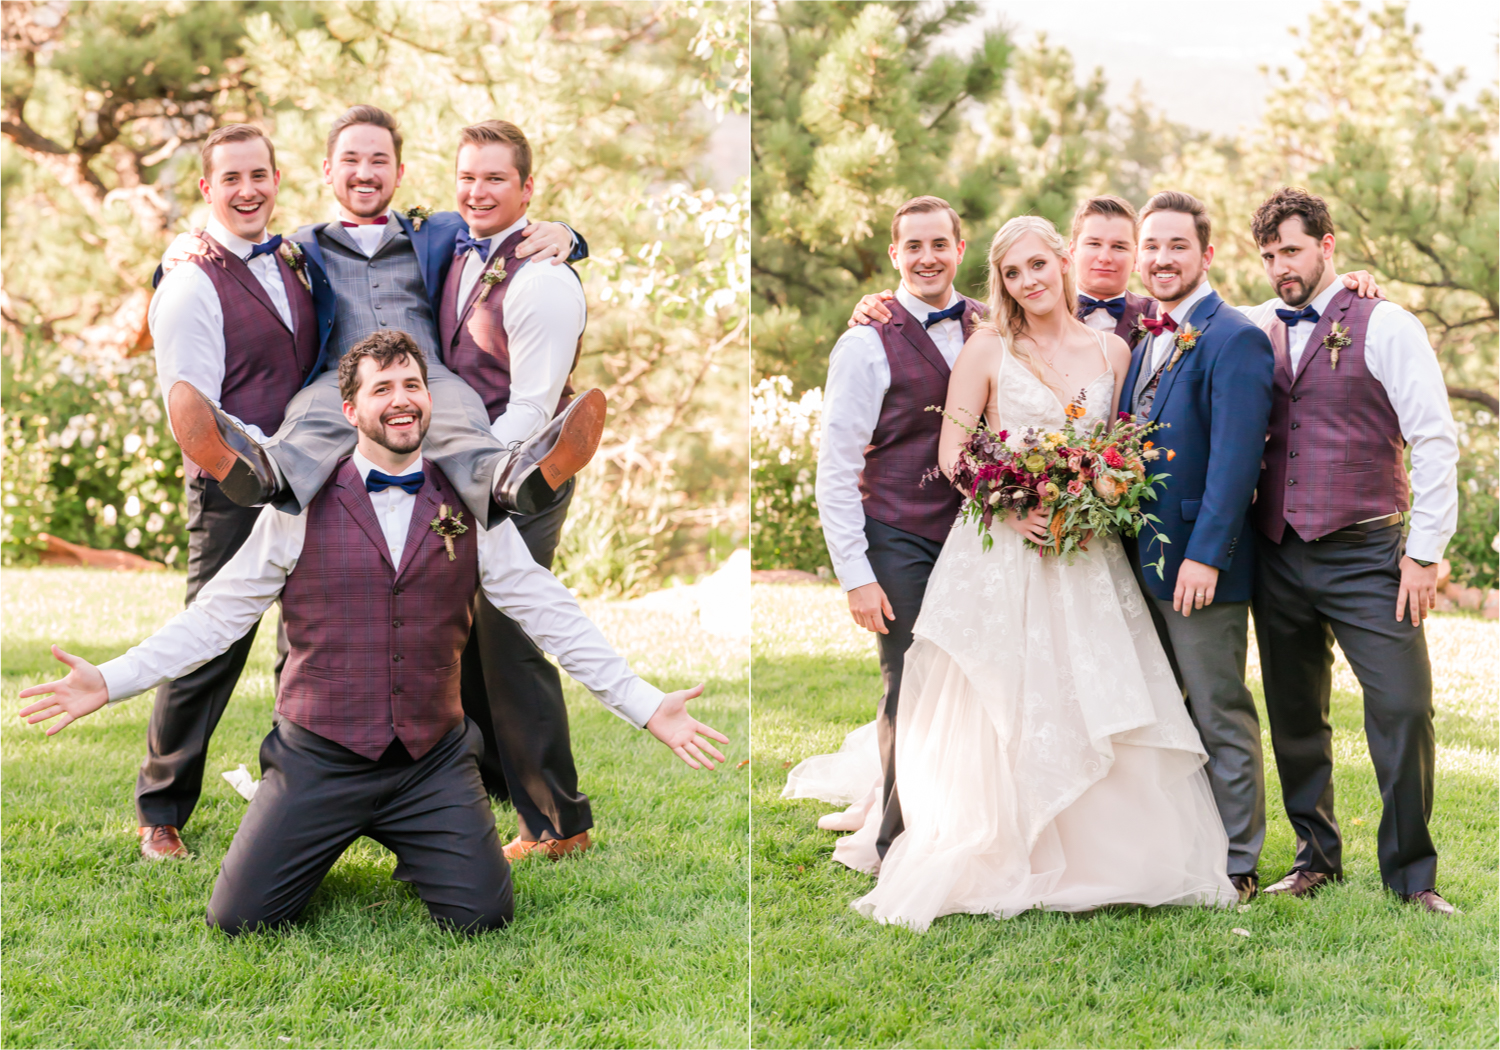 Romantic Whimsical Wedding at the Lionscrest Manor in Lyons, CO | Britni Girard Photography - Wedding Photo and Video Team | Rustic Fall Decor mixed in Burgundy, Blush, Gold and Sage | Wedding Dress from Anna Be Bridal by Hailey Paige | Hair and Makeup by Glam 5280 Chaundra Revier | Florals by Aflorae | 